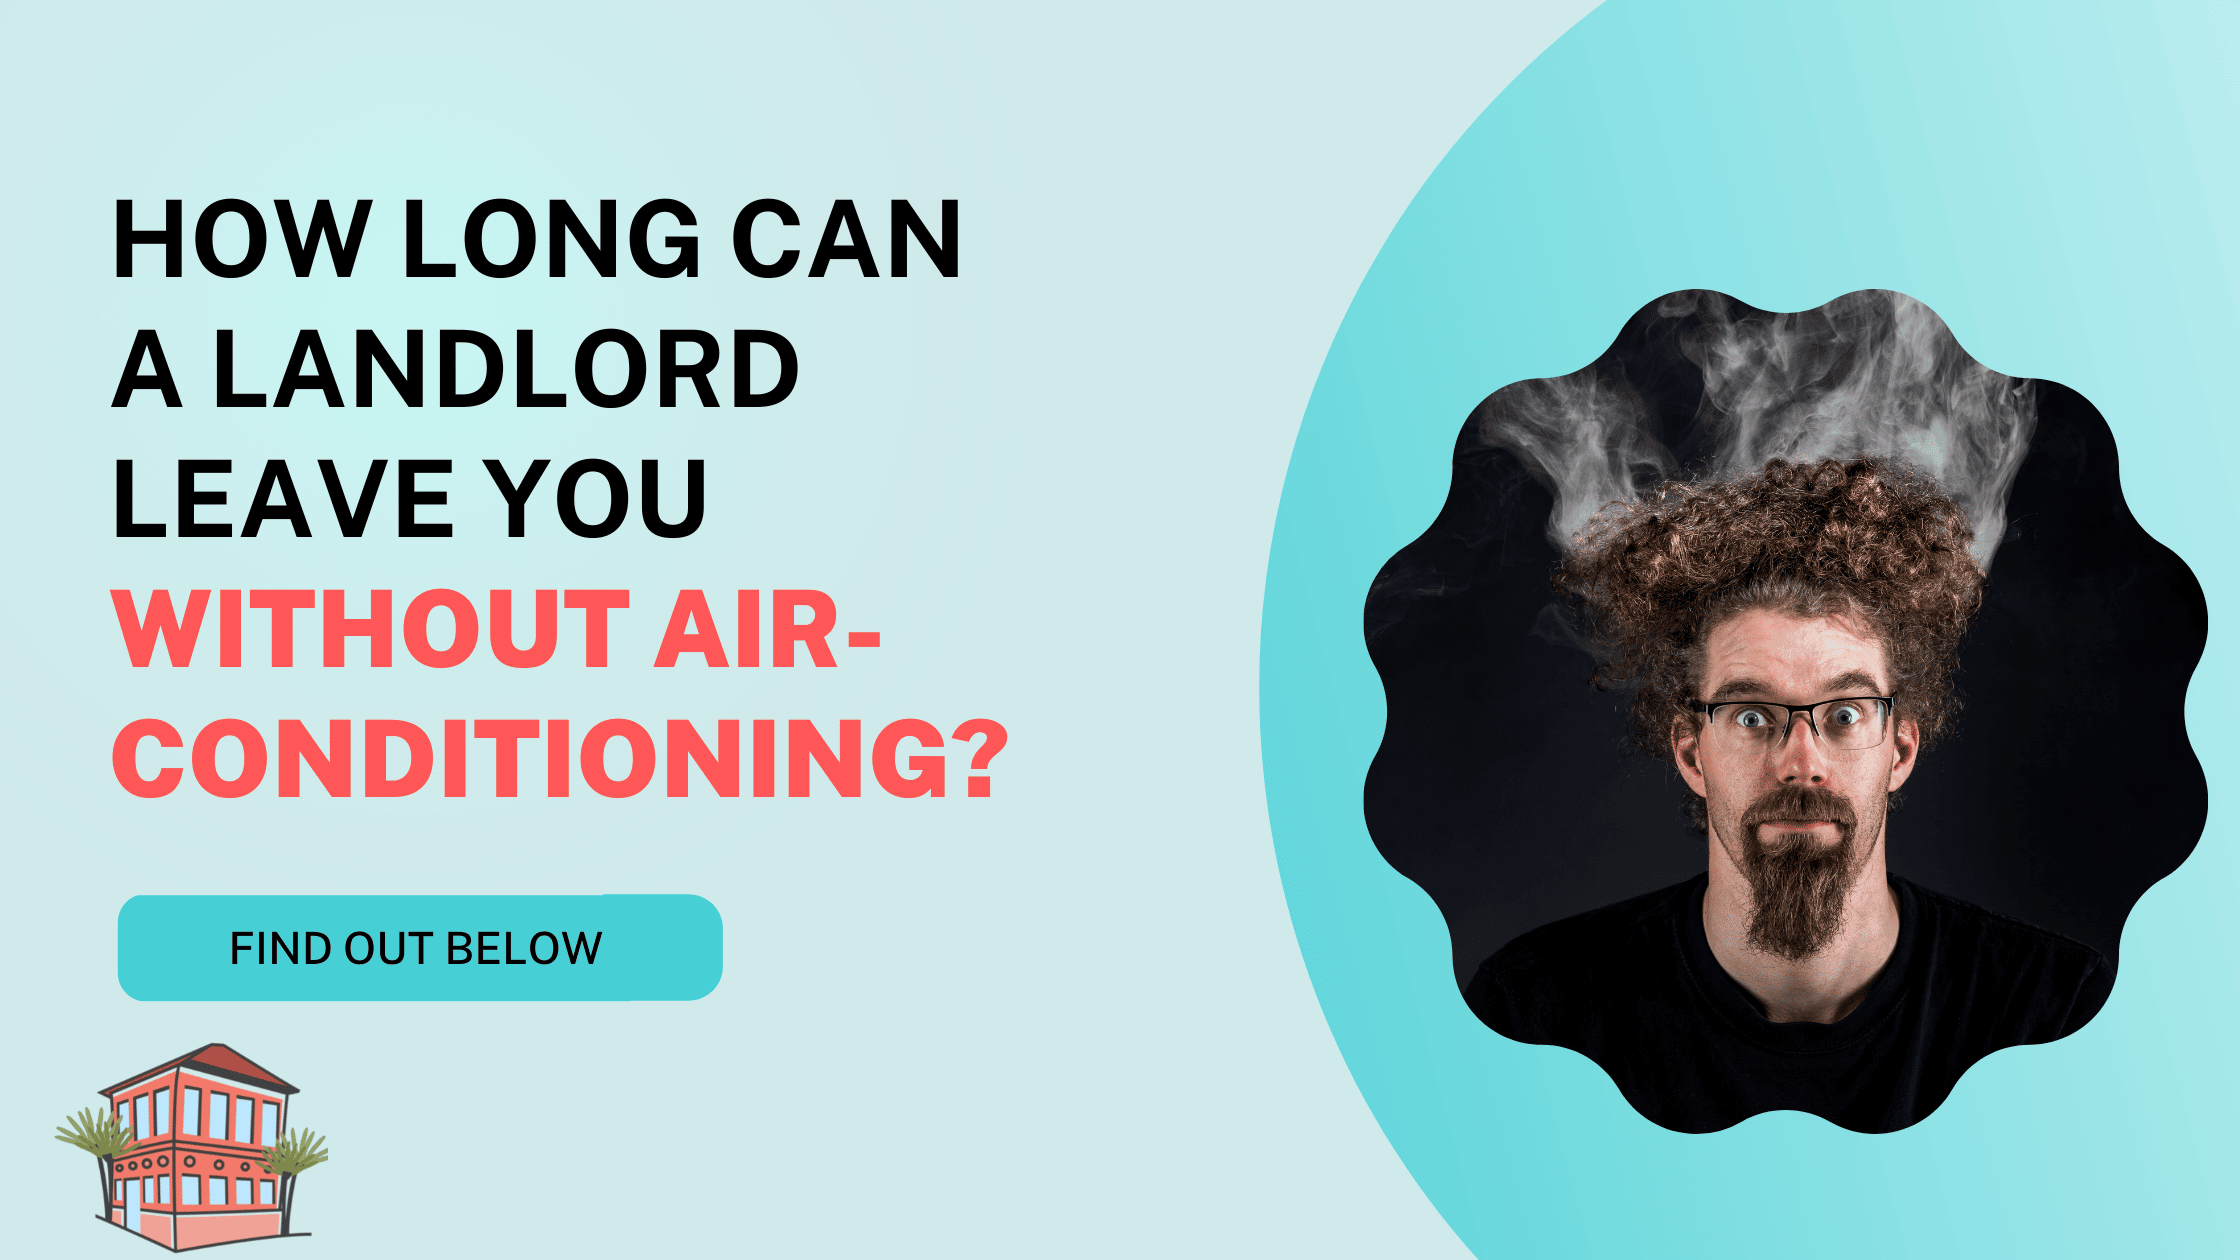 how long can a landlord leave a tenant without air conditioning